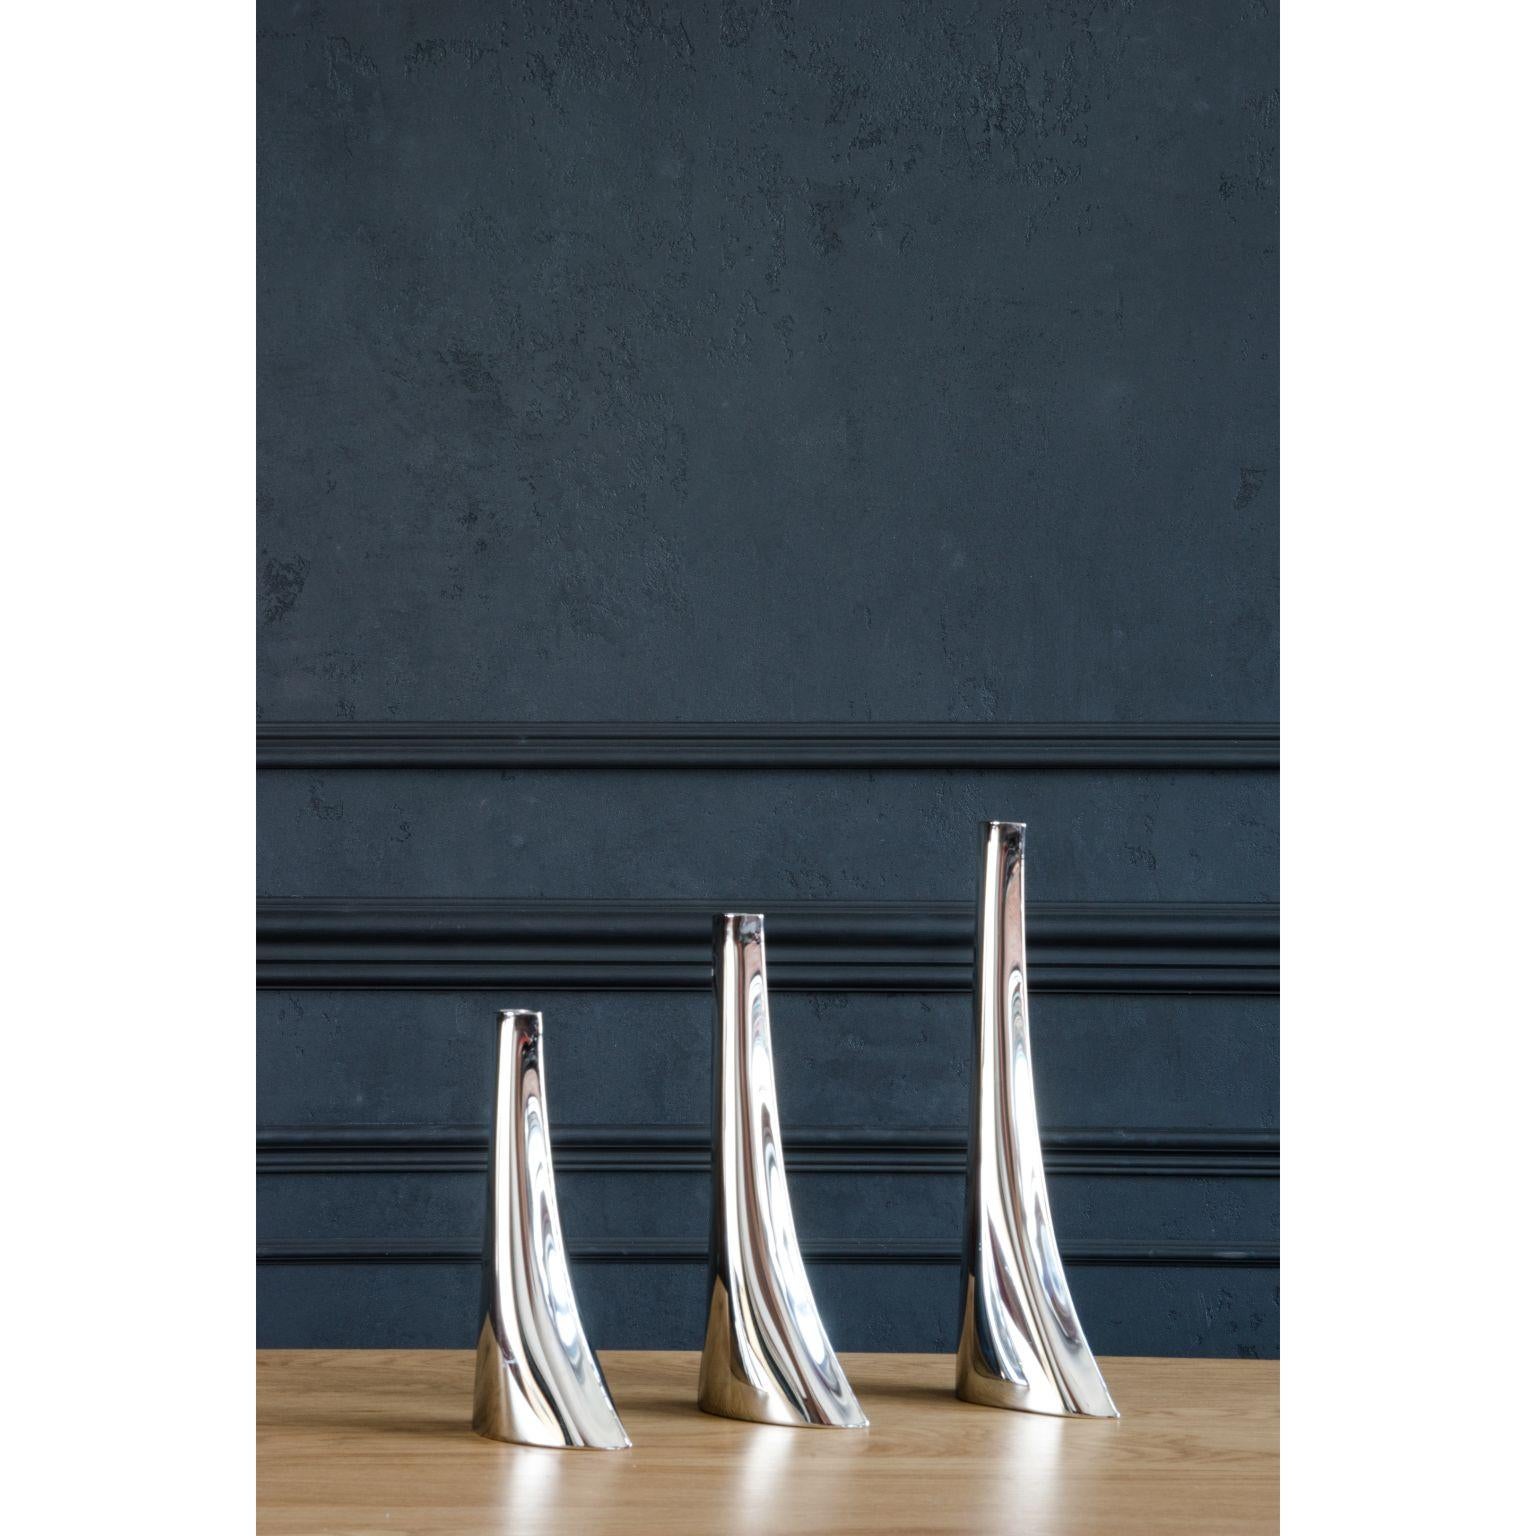 Set of 3 Leyki vases by Zieta
Dimensions: Vase 1 H 22 x W 15 x D 11 cm.
Vase 2: H 27 x W 11 x D 16 cm.
Vase 3: H 32 x W 11 x D 13 cm.
Materials: polished stainless steel.

Multifunctional subtlety
Leyki is a functional object with an